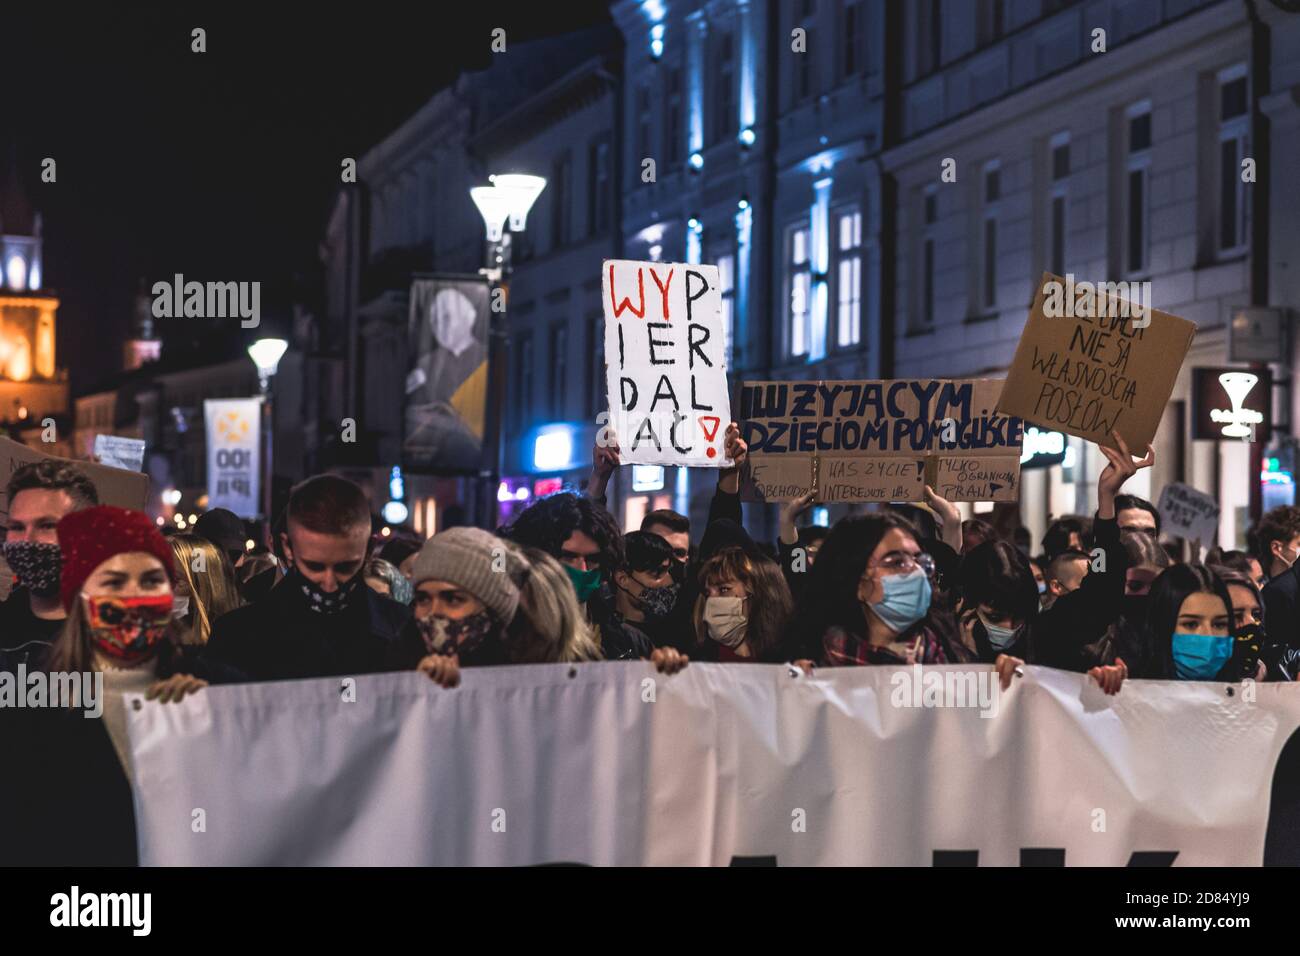 Lublin, Poland - October 23, 2020: People in city centre during protest organized by Strajk Kobiet against abortion ban in Poland Stock Photo